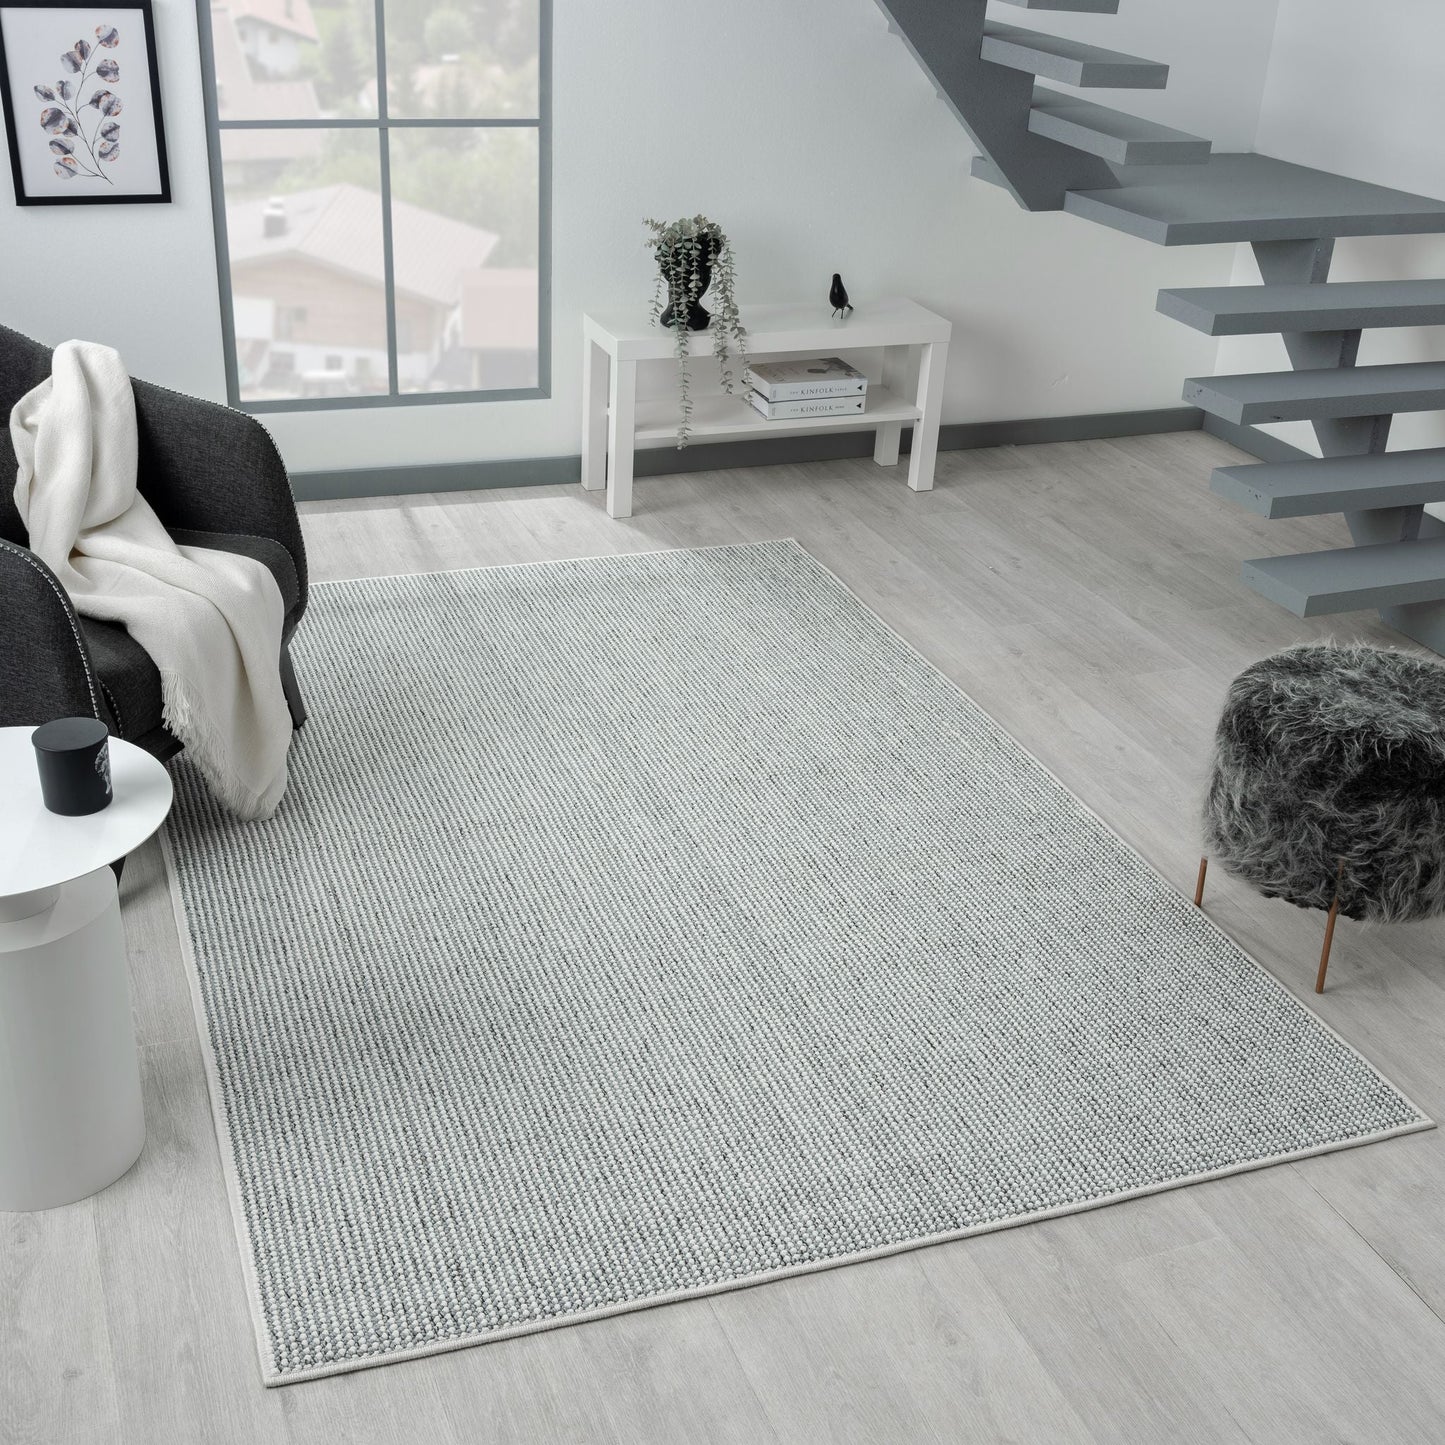 Solace 196 Steel Saray Rugs